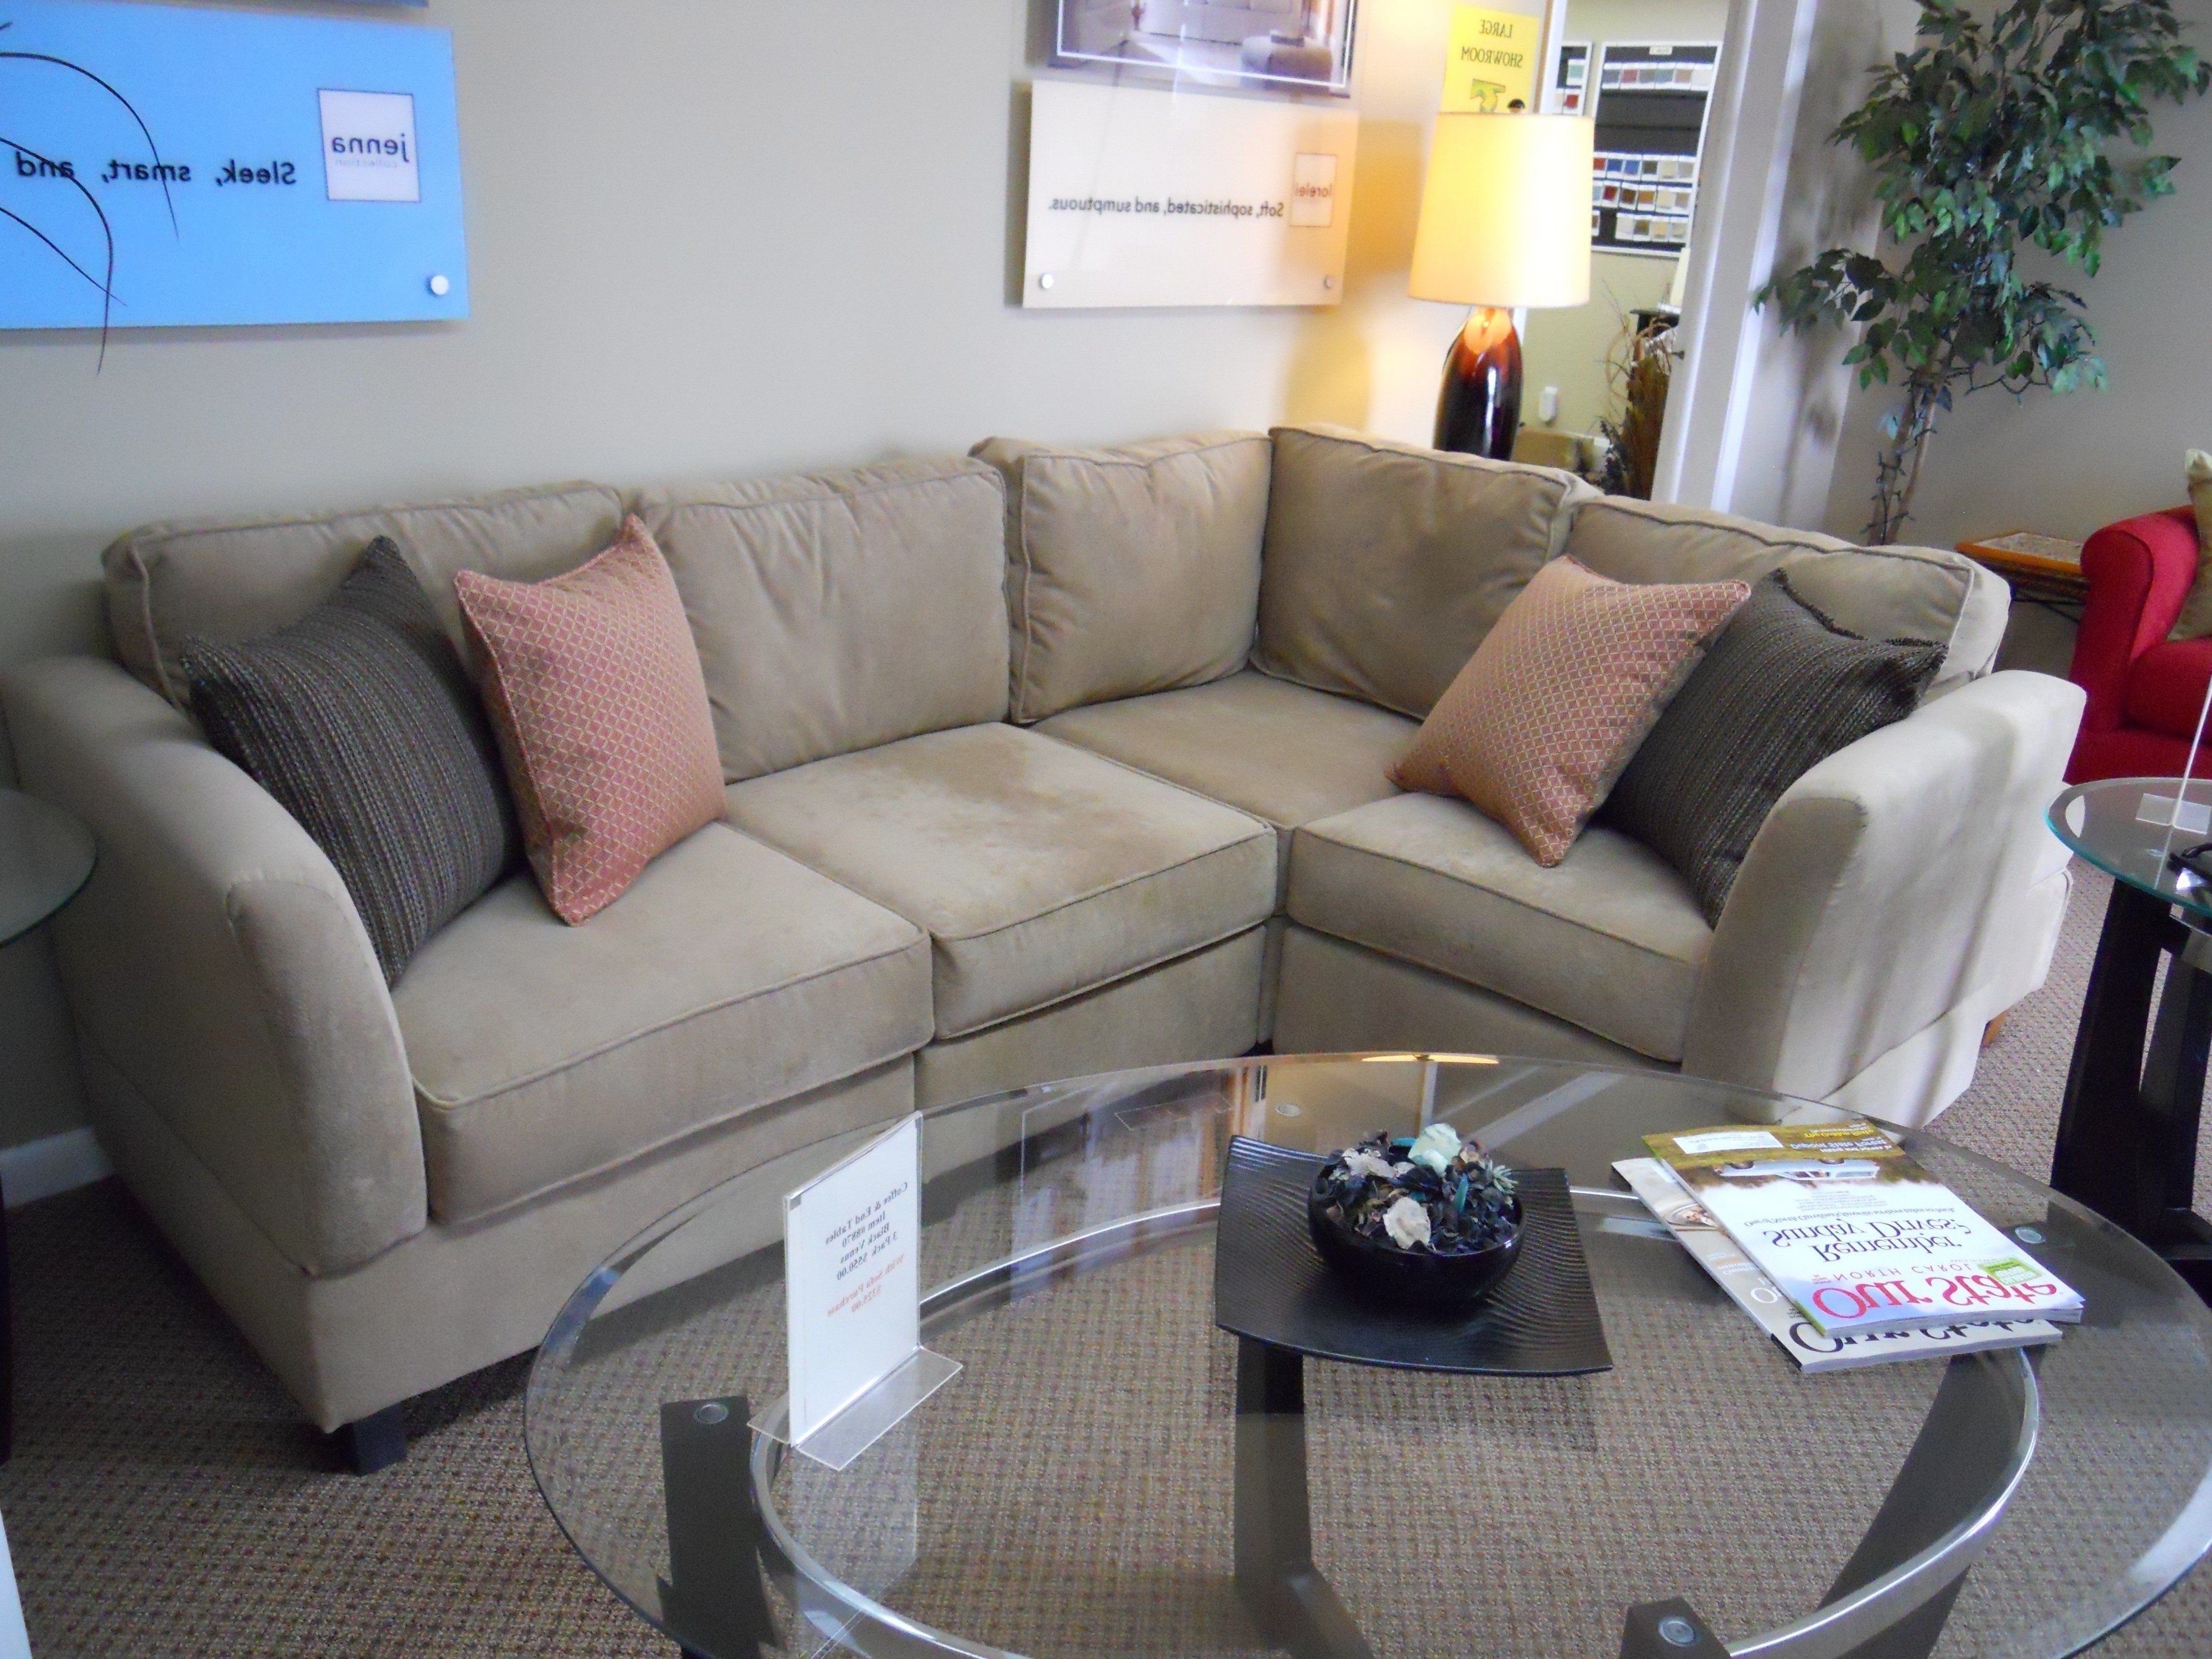 Well Known Reclining Sectional Sofas For Small Spaces W Script With Small Inside Sectional Sofas In Small Spaces (View 4 of 20)